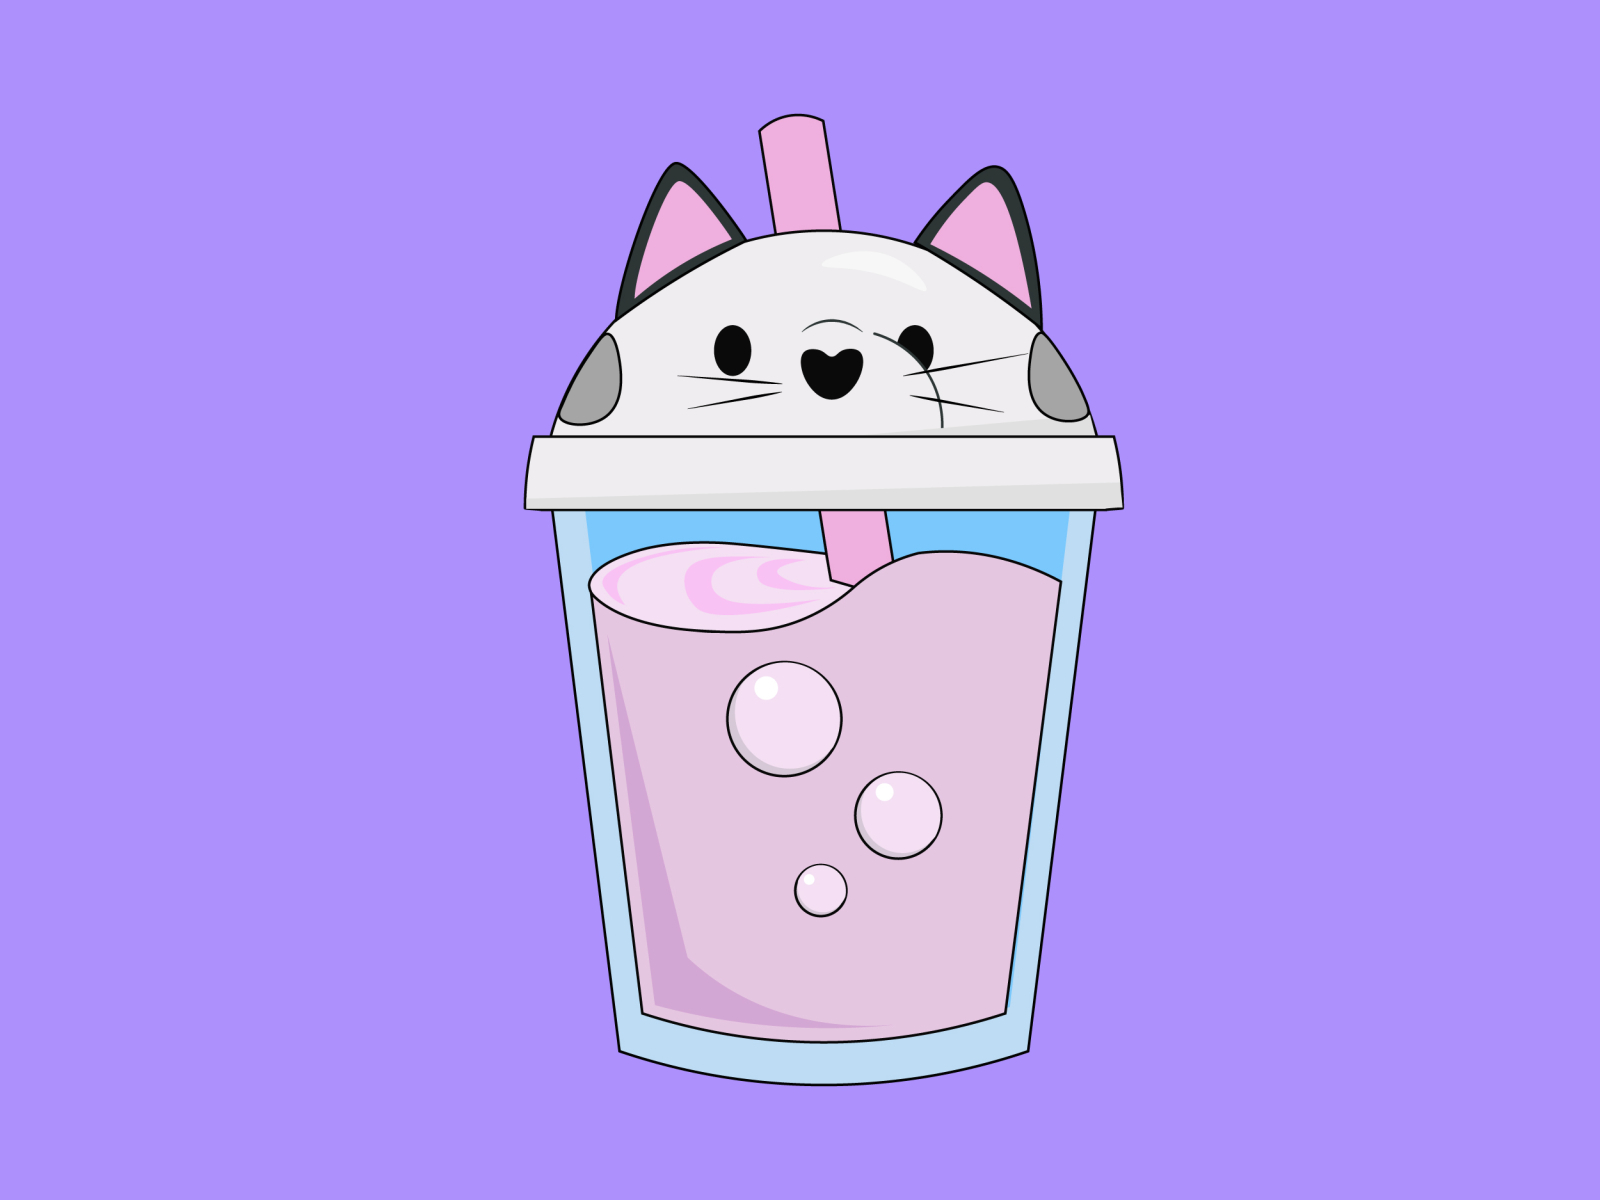 Would you like a glass of catsoda? by Mona on Dribbble